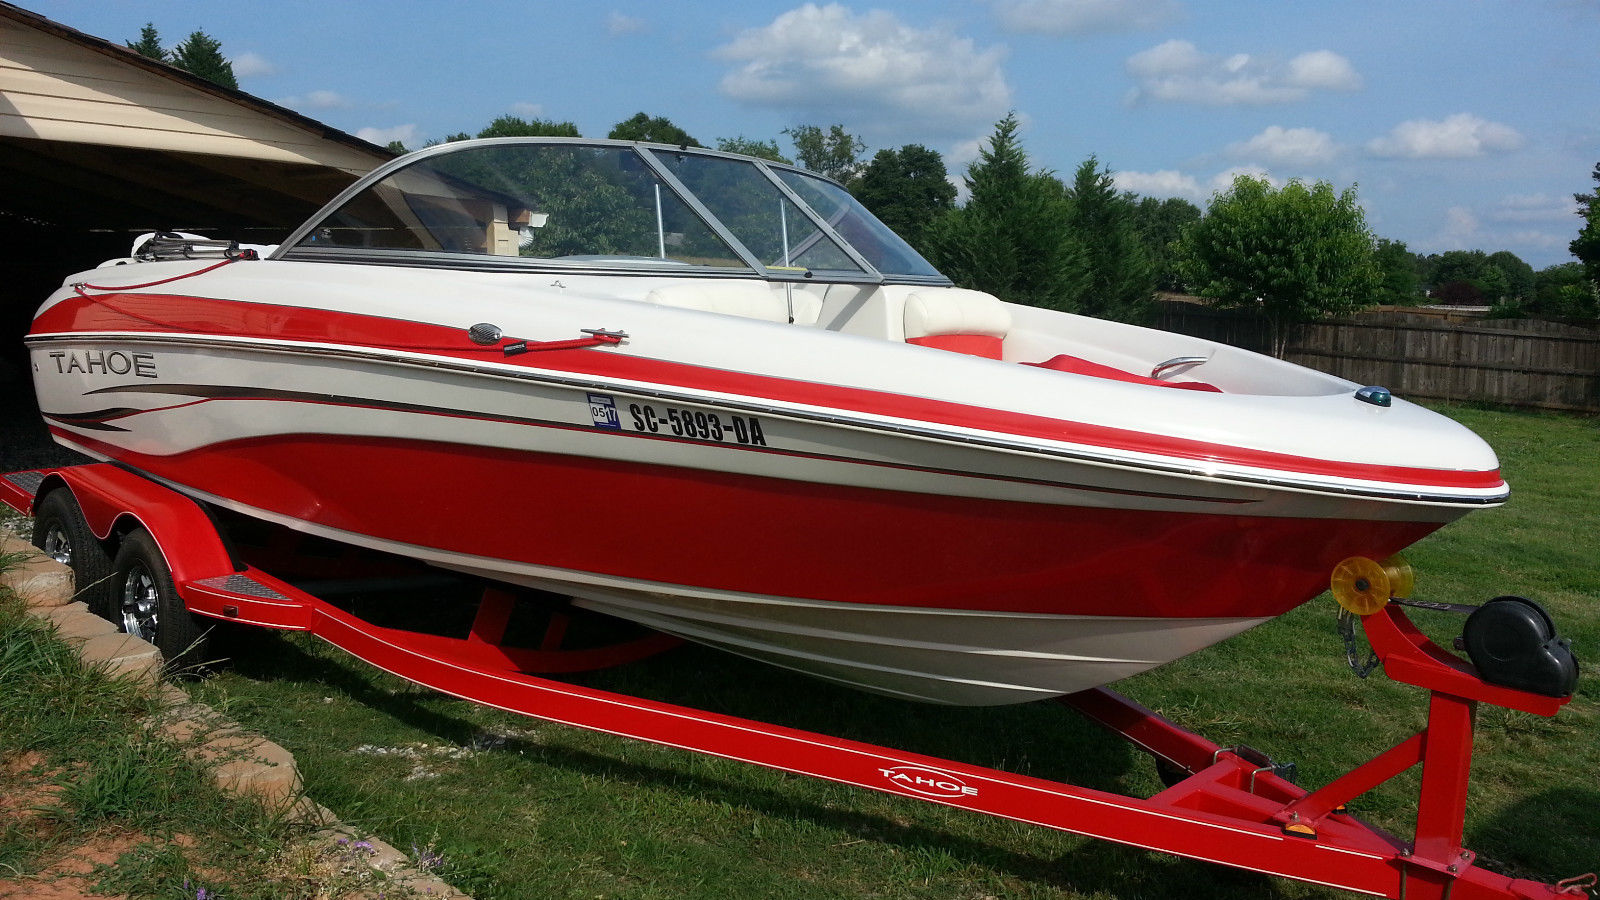 TAHOE Q6 2008 for sale for $16,500 - Boats-from-USA.com